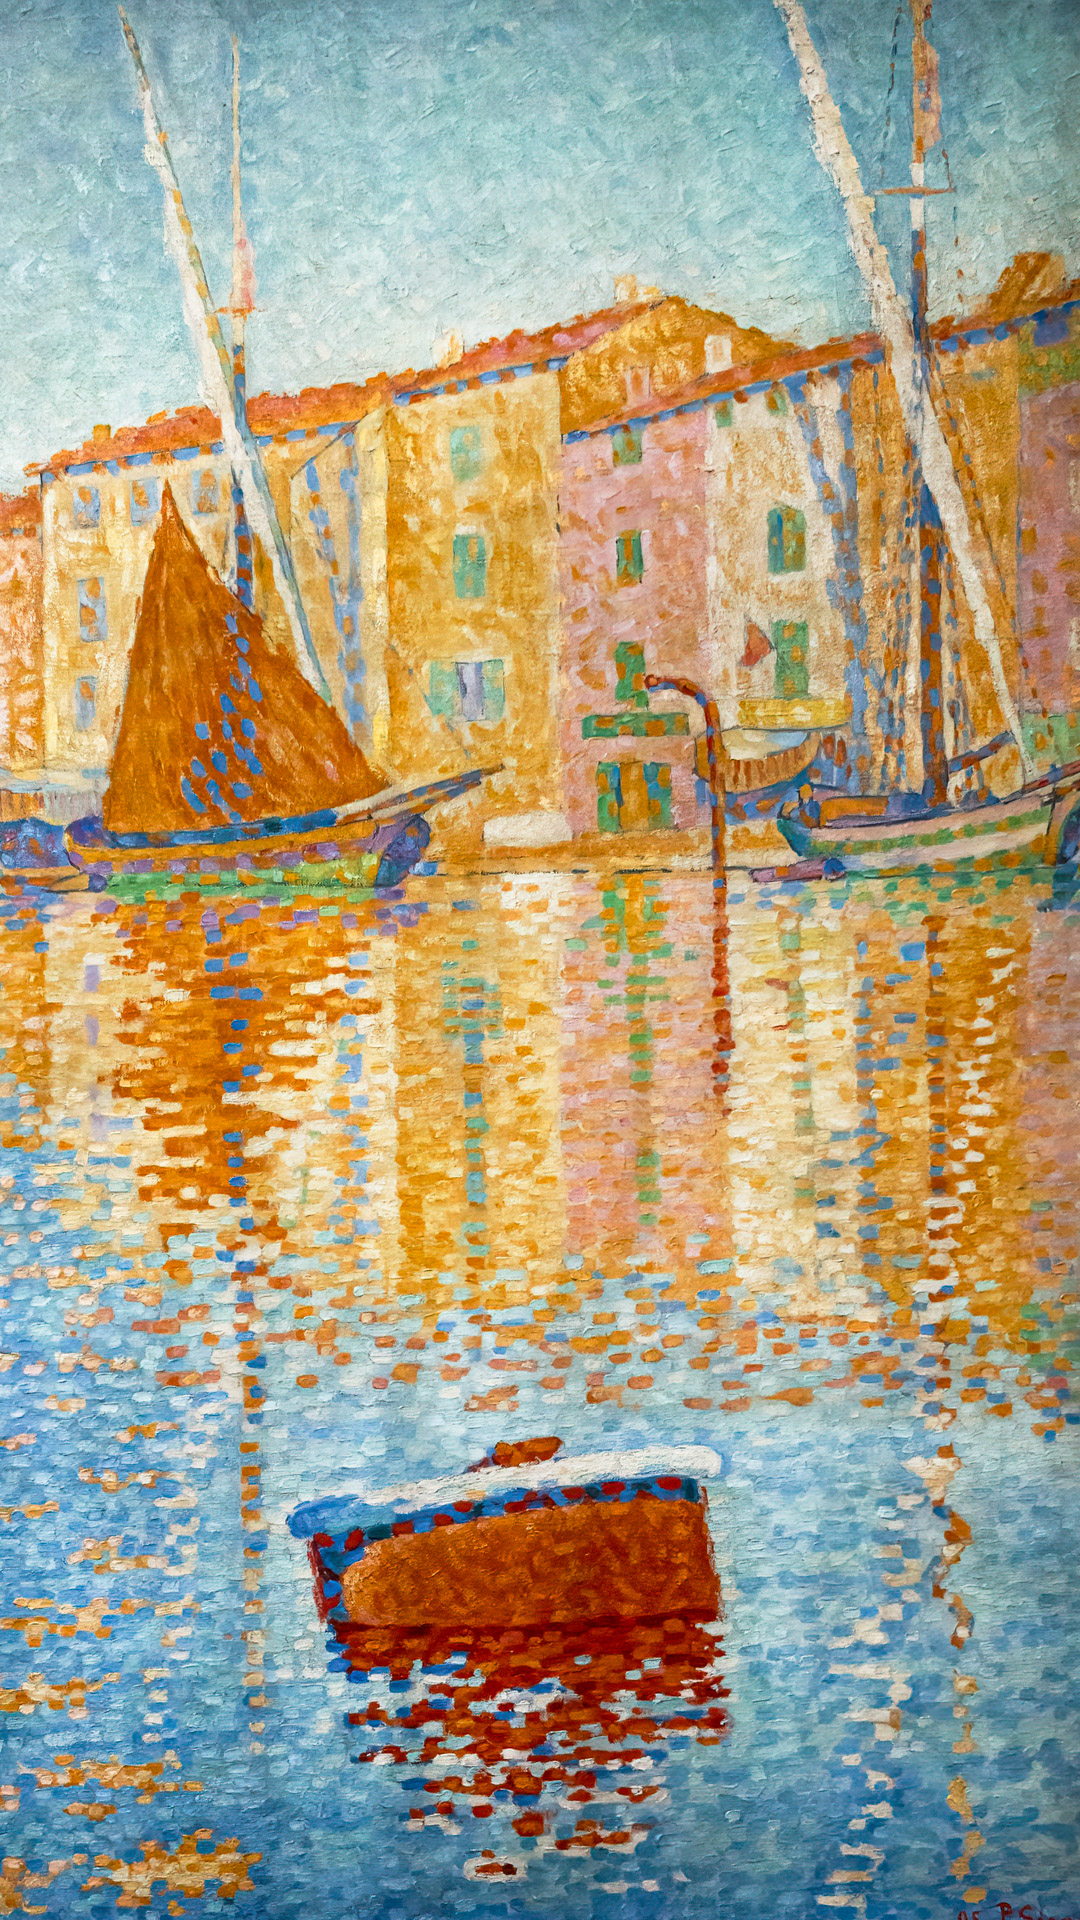 Explore the vibrant pointillism of Paul Signac impressionism wallpaper, adding a burst of color to your digital devices.